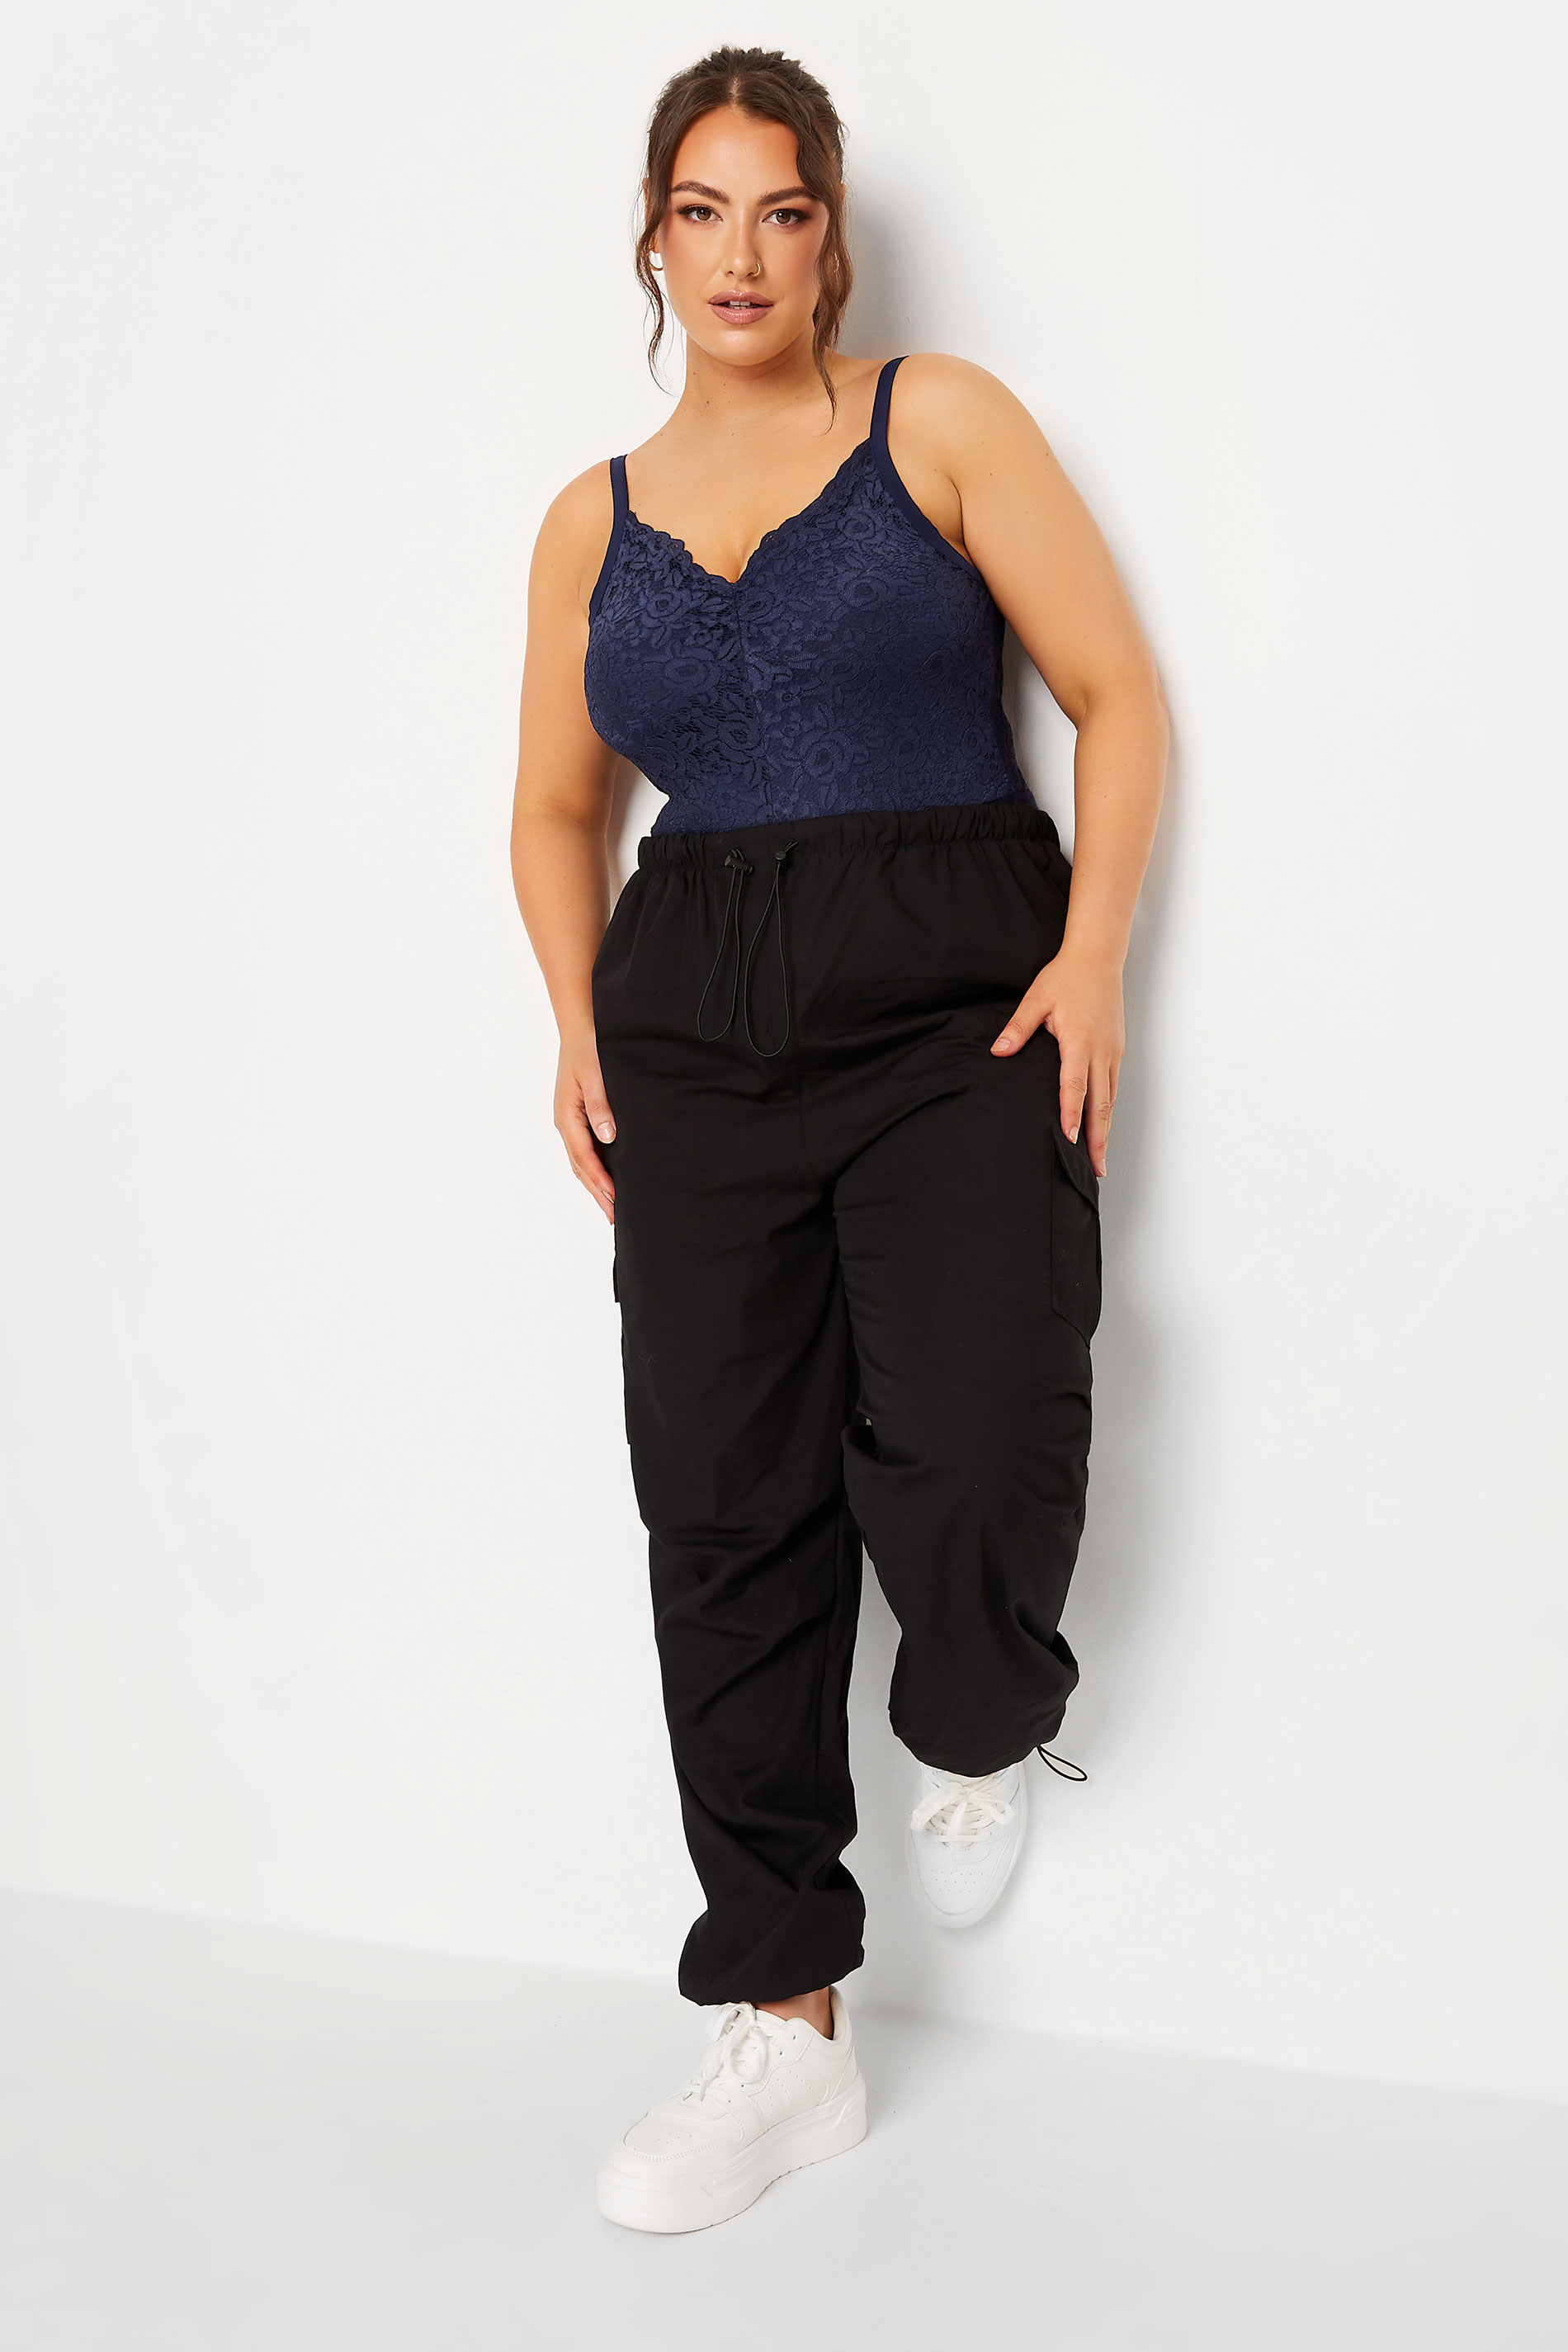 LIMITED COLLECTION Plus Size Navy Blue Lace Bodysuit | Yours Clothing 2